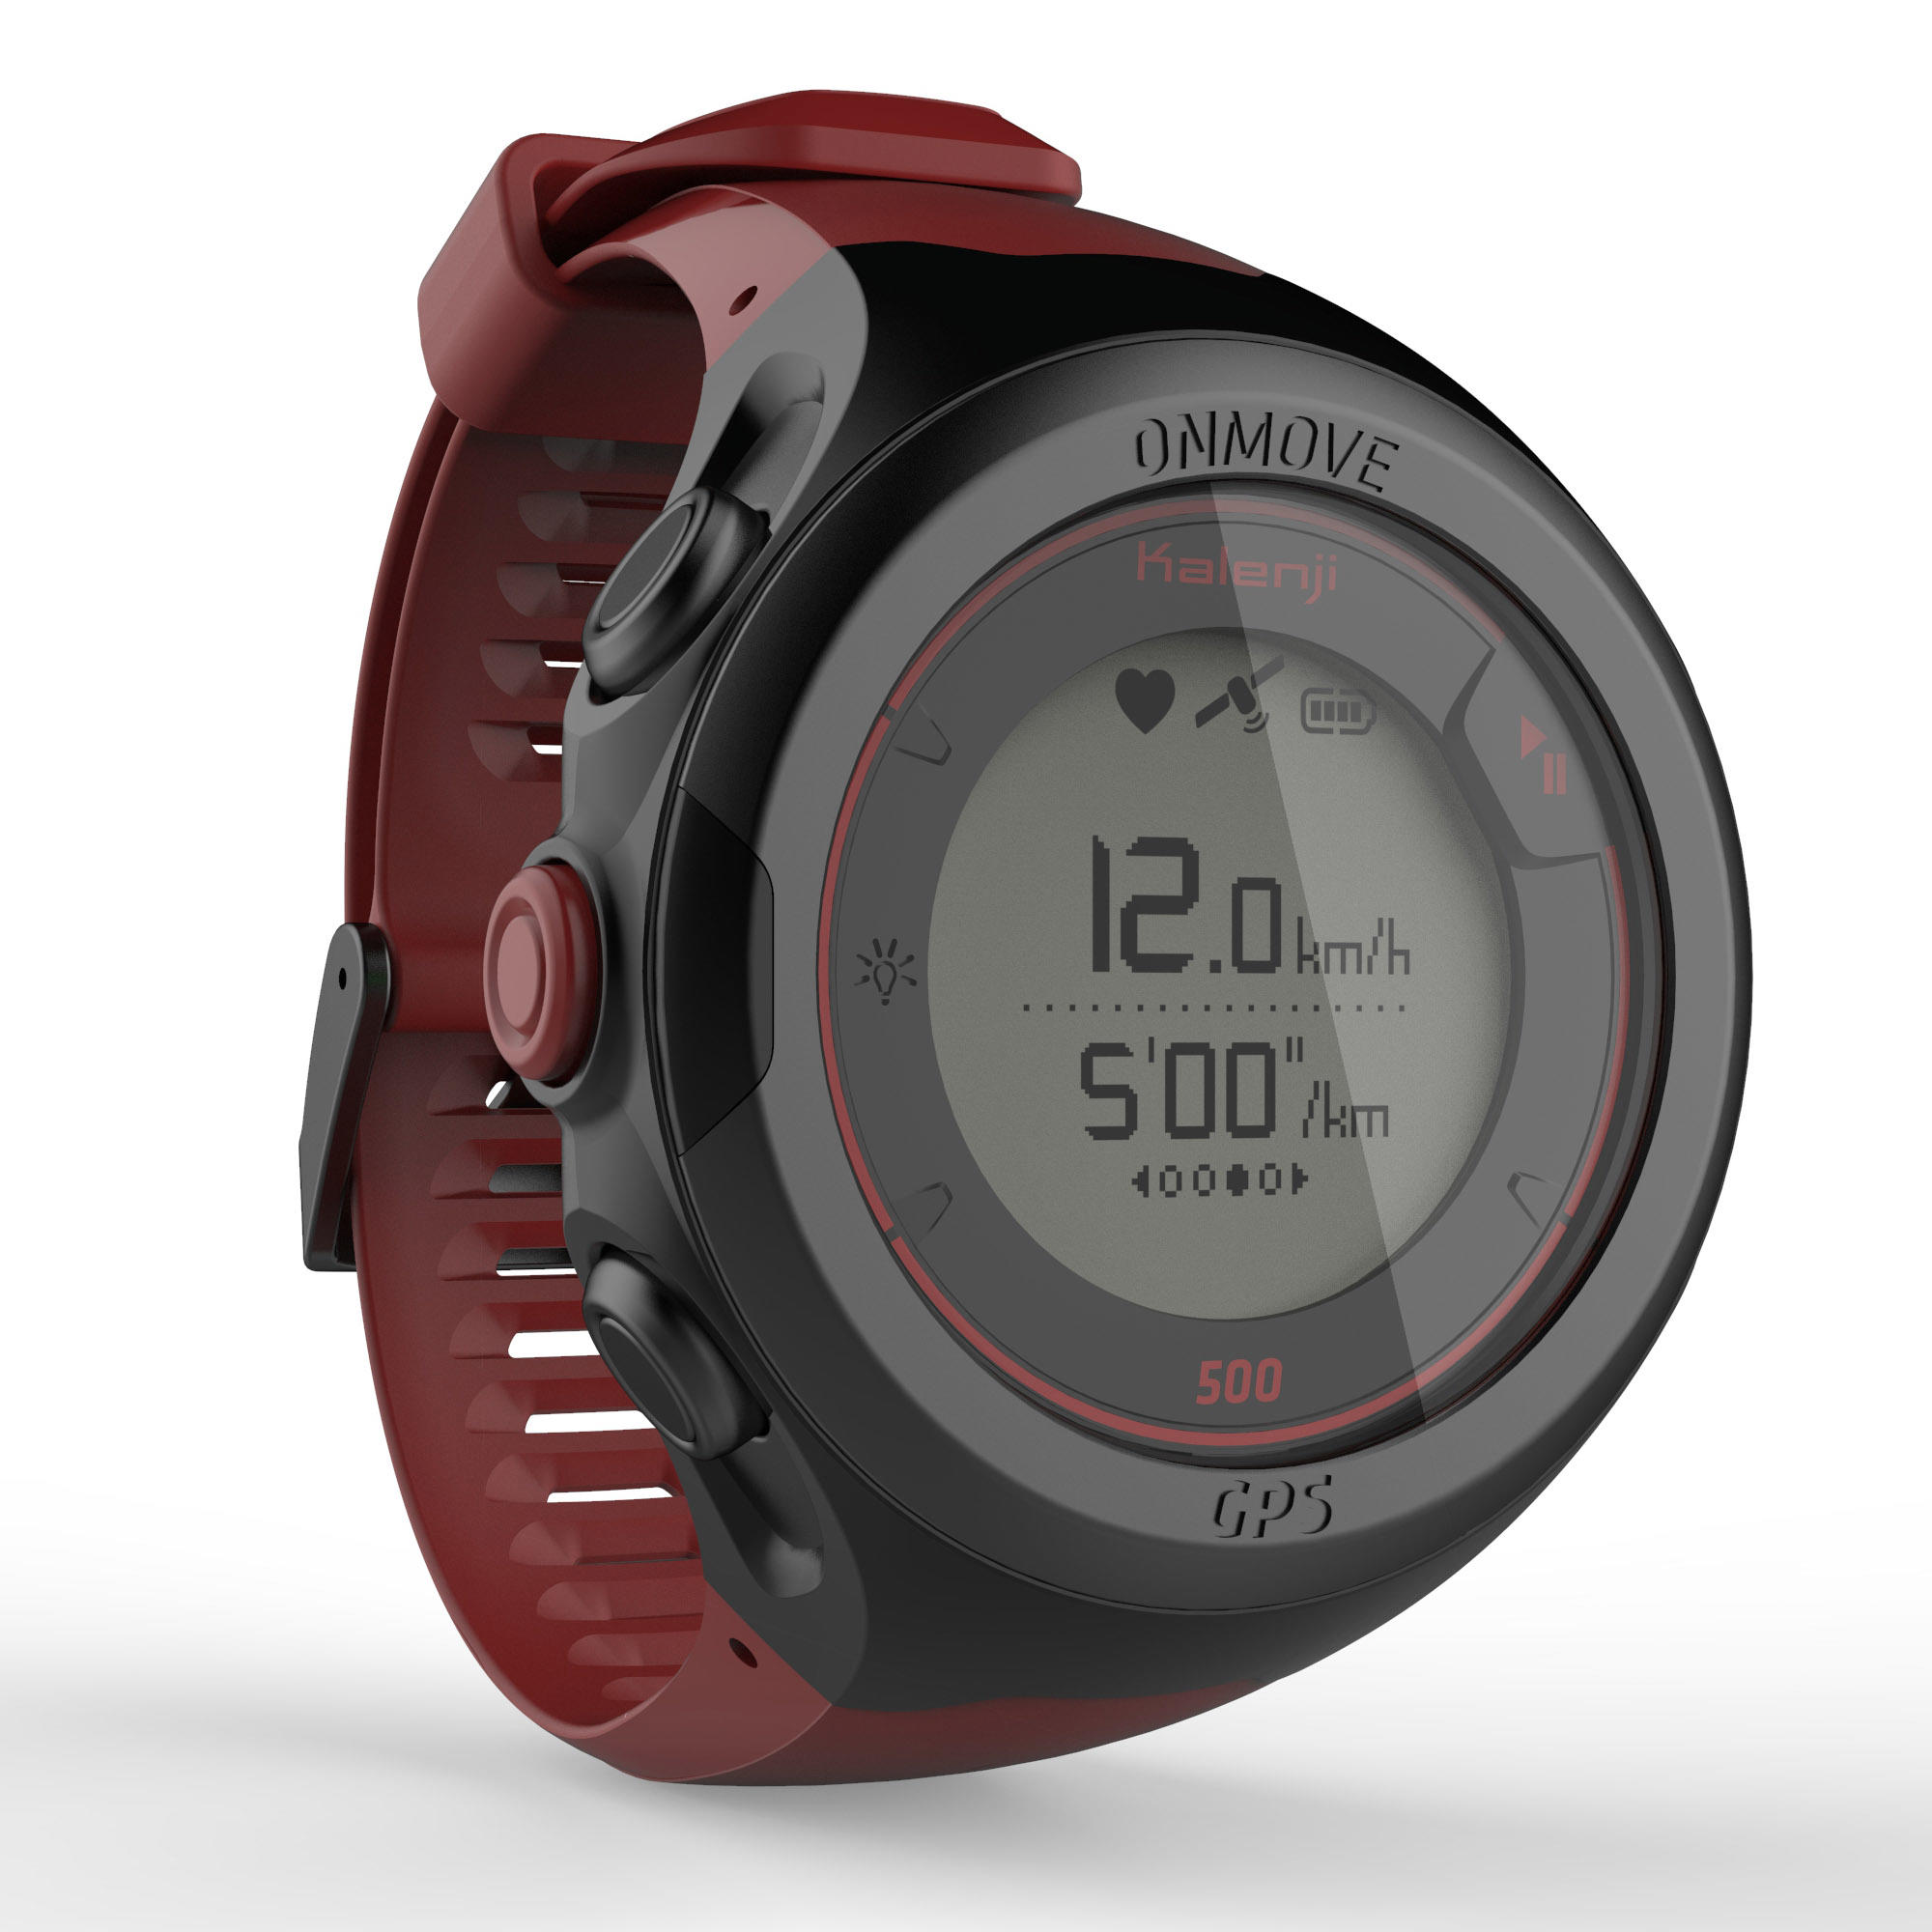 KIPRUN ONmove 500 GPS running watch and wrist heart rate monitor - limited edition red